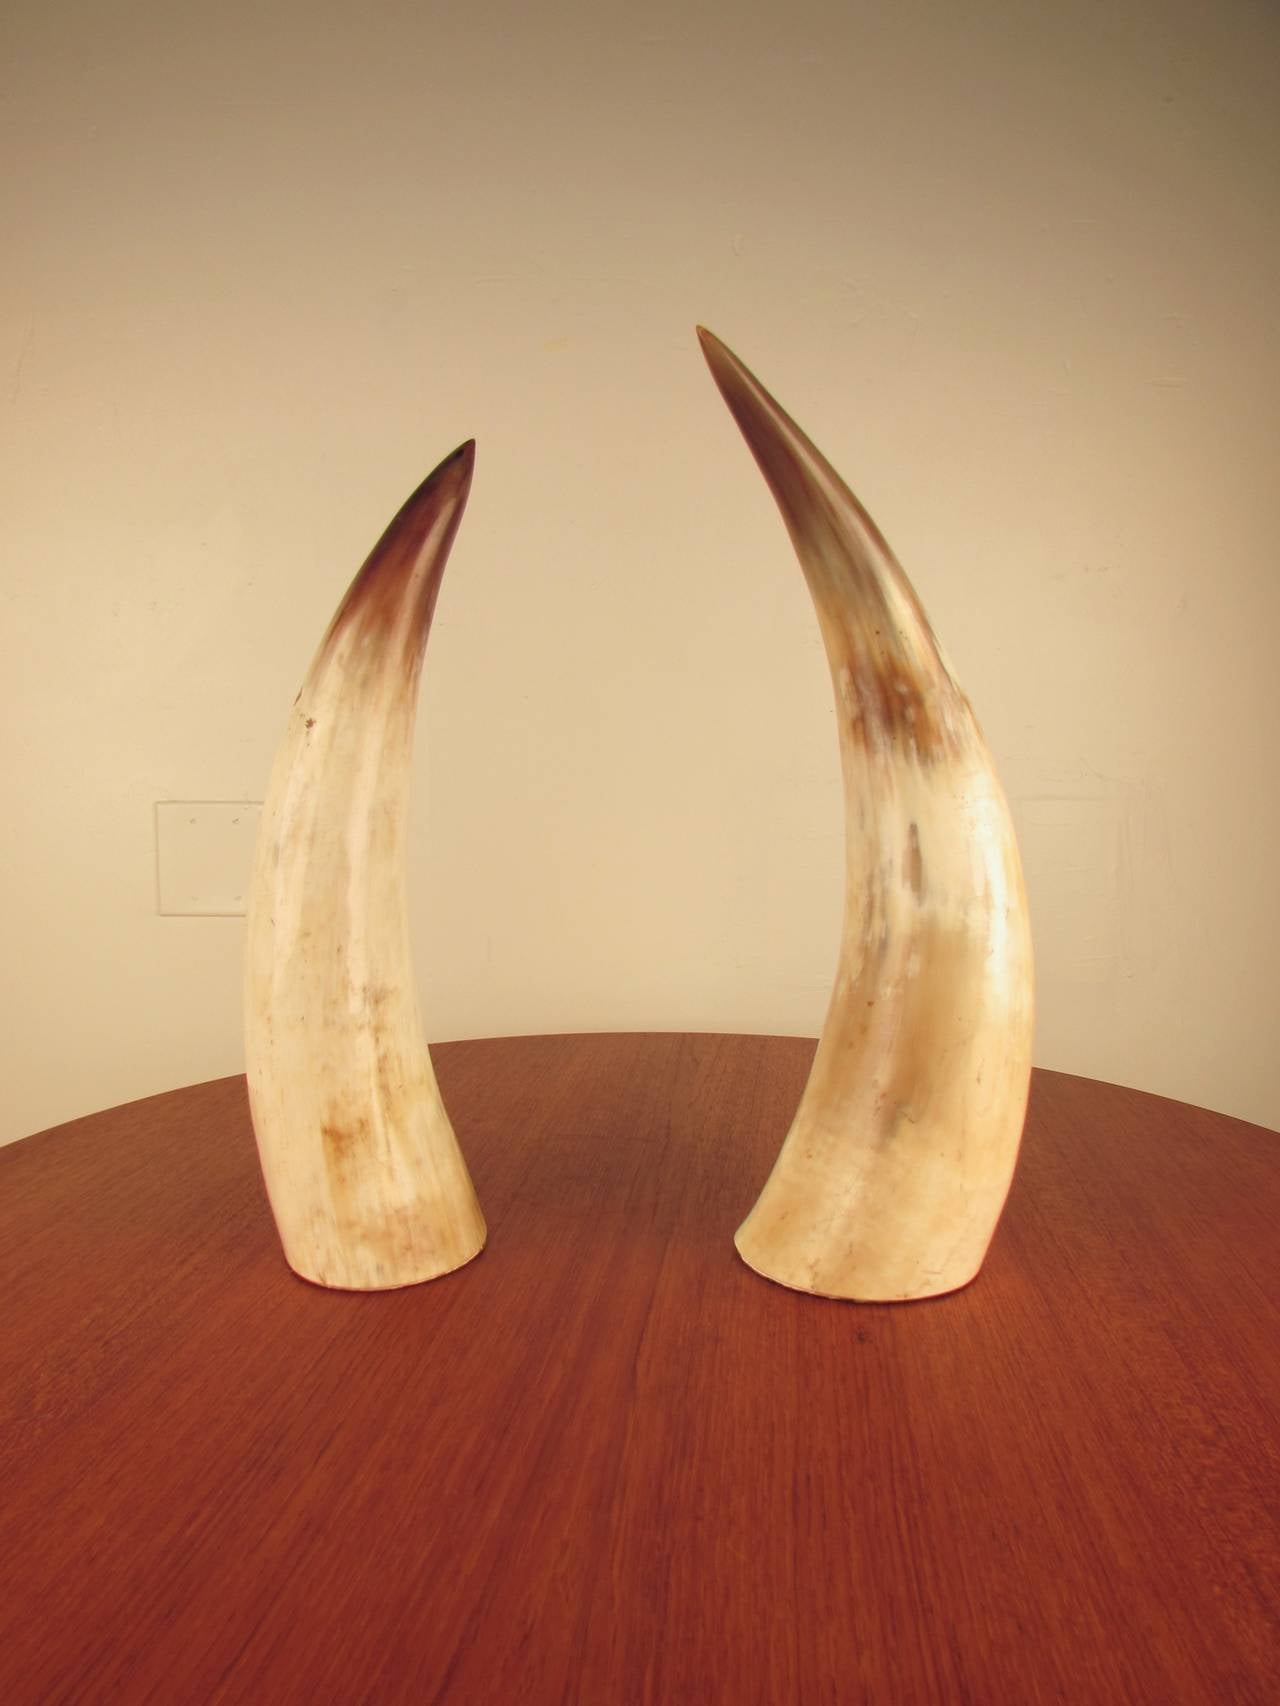 Truly gorgeous pair of large natural horns. The subtleties of the color variations are just stunning--tons of visual interest. 
Both are 5.5